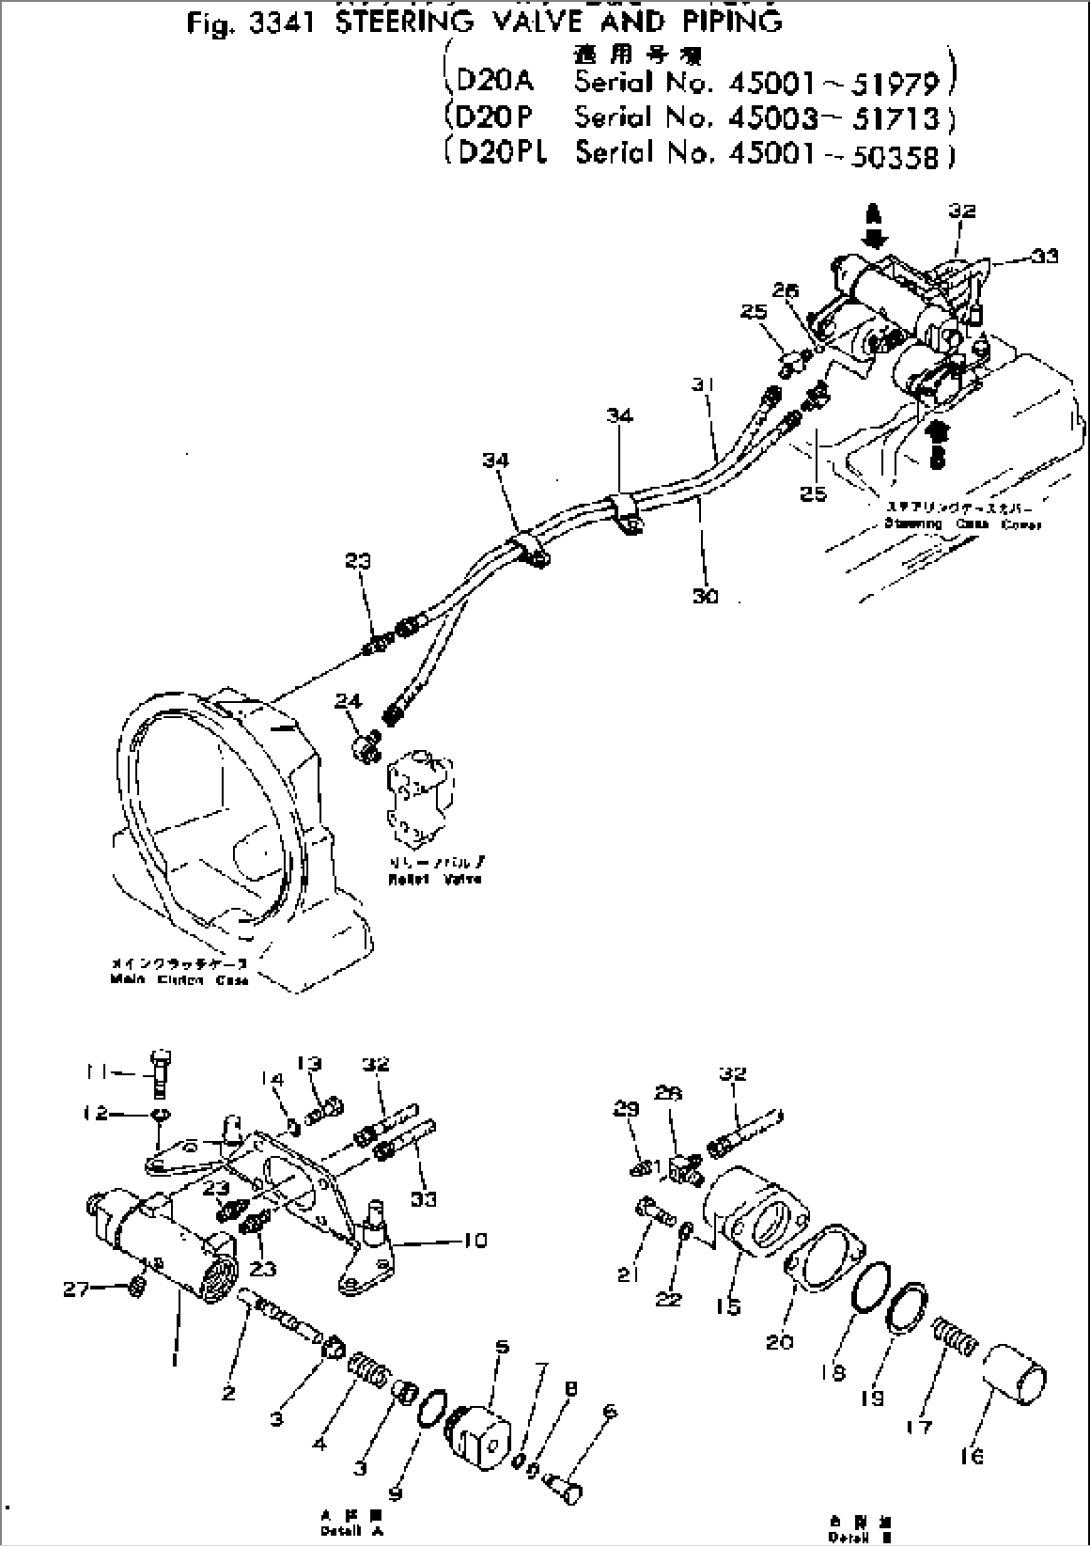 STEERING VALVE AND PIPING(#45001-51713)